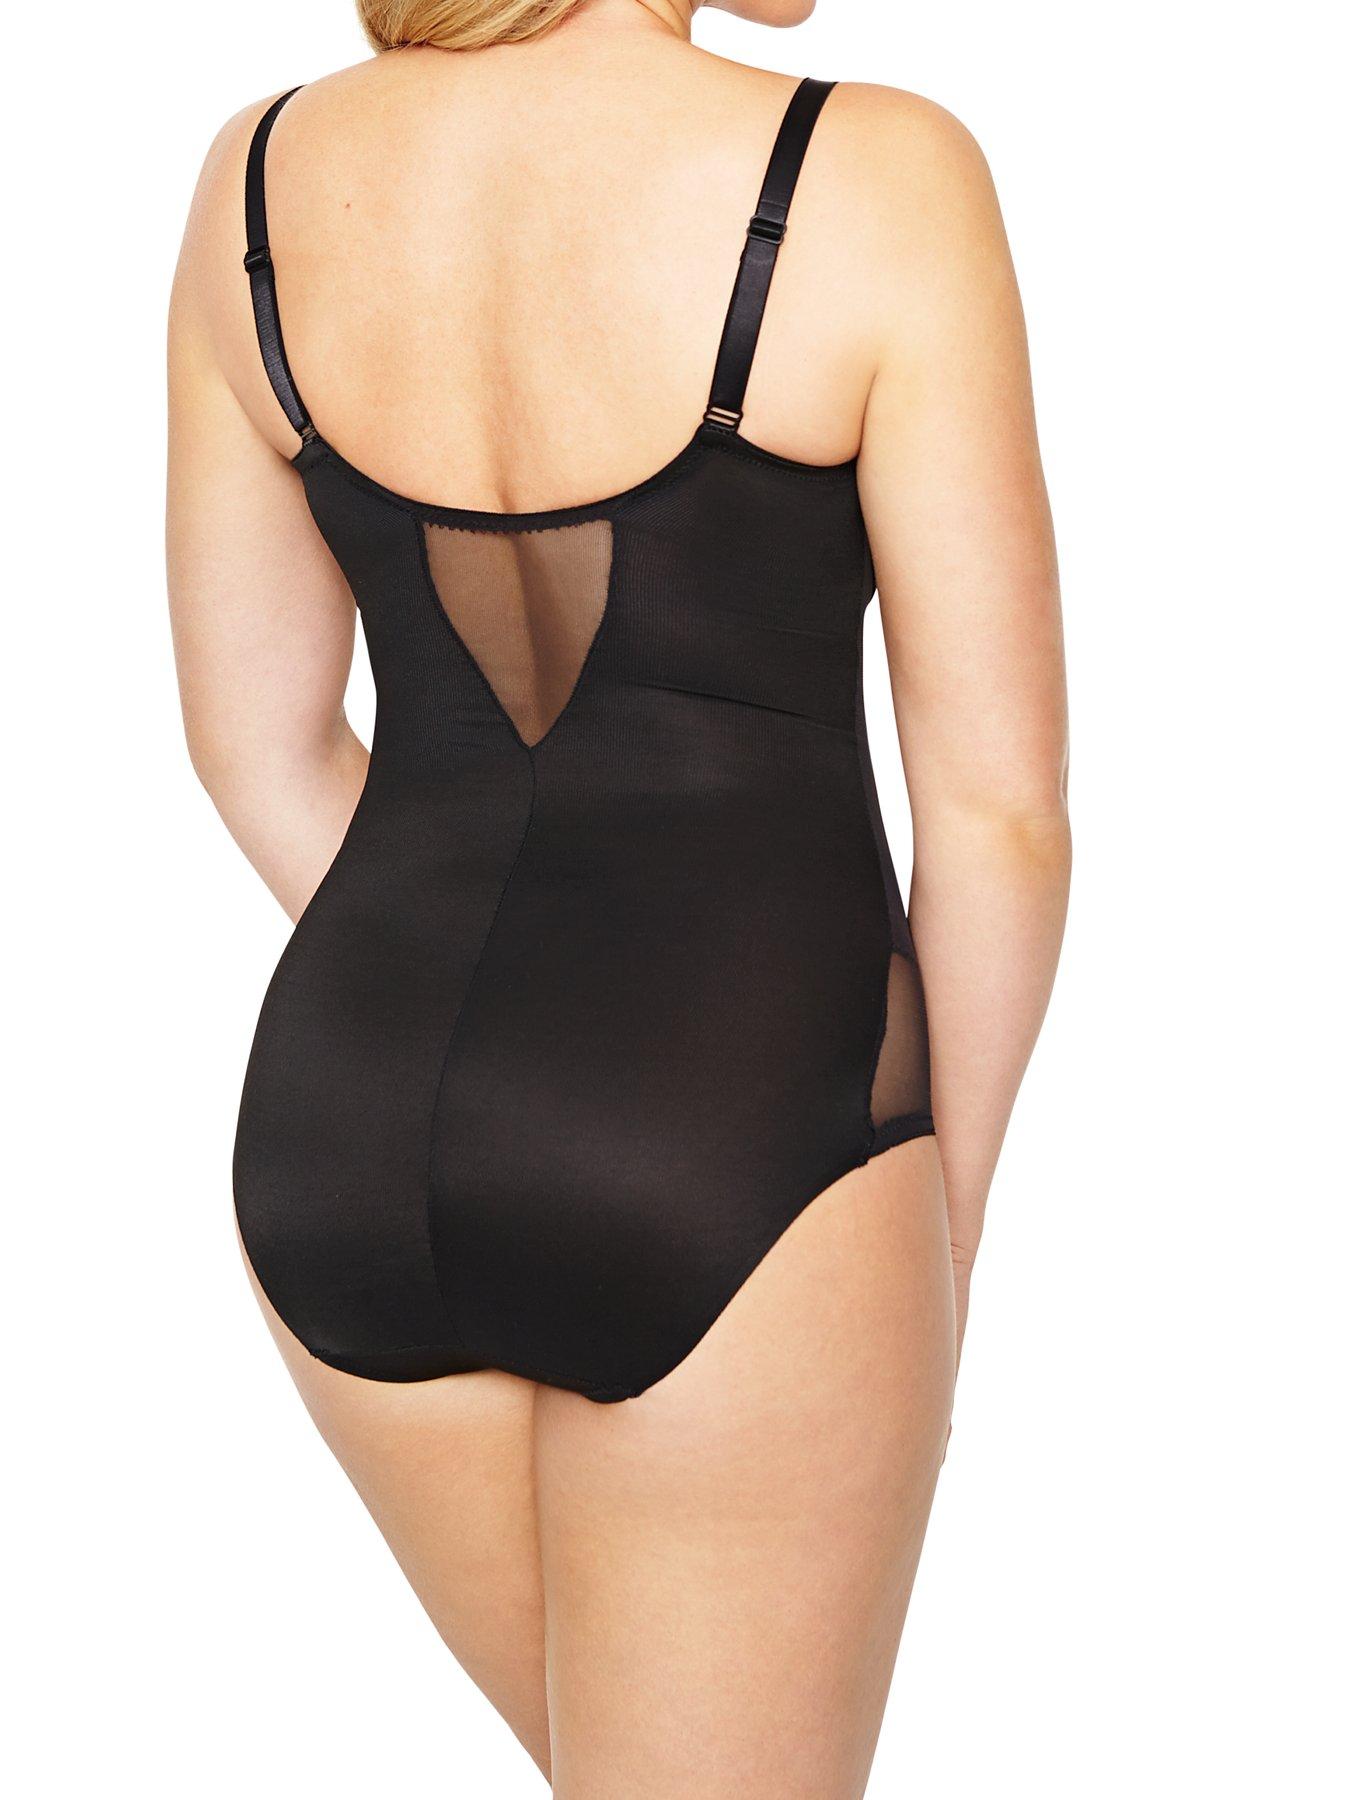 Miraclesuit Sexy Sheer Shaping Bodybriefer - Black